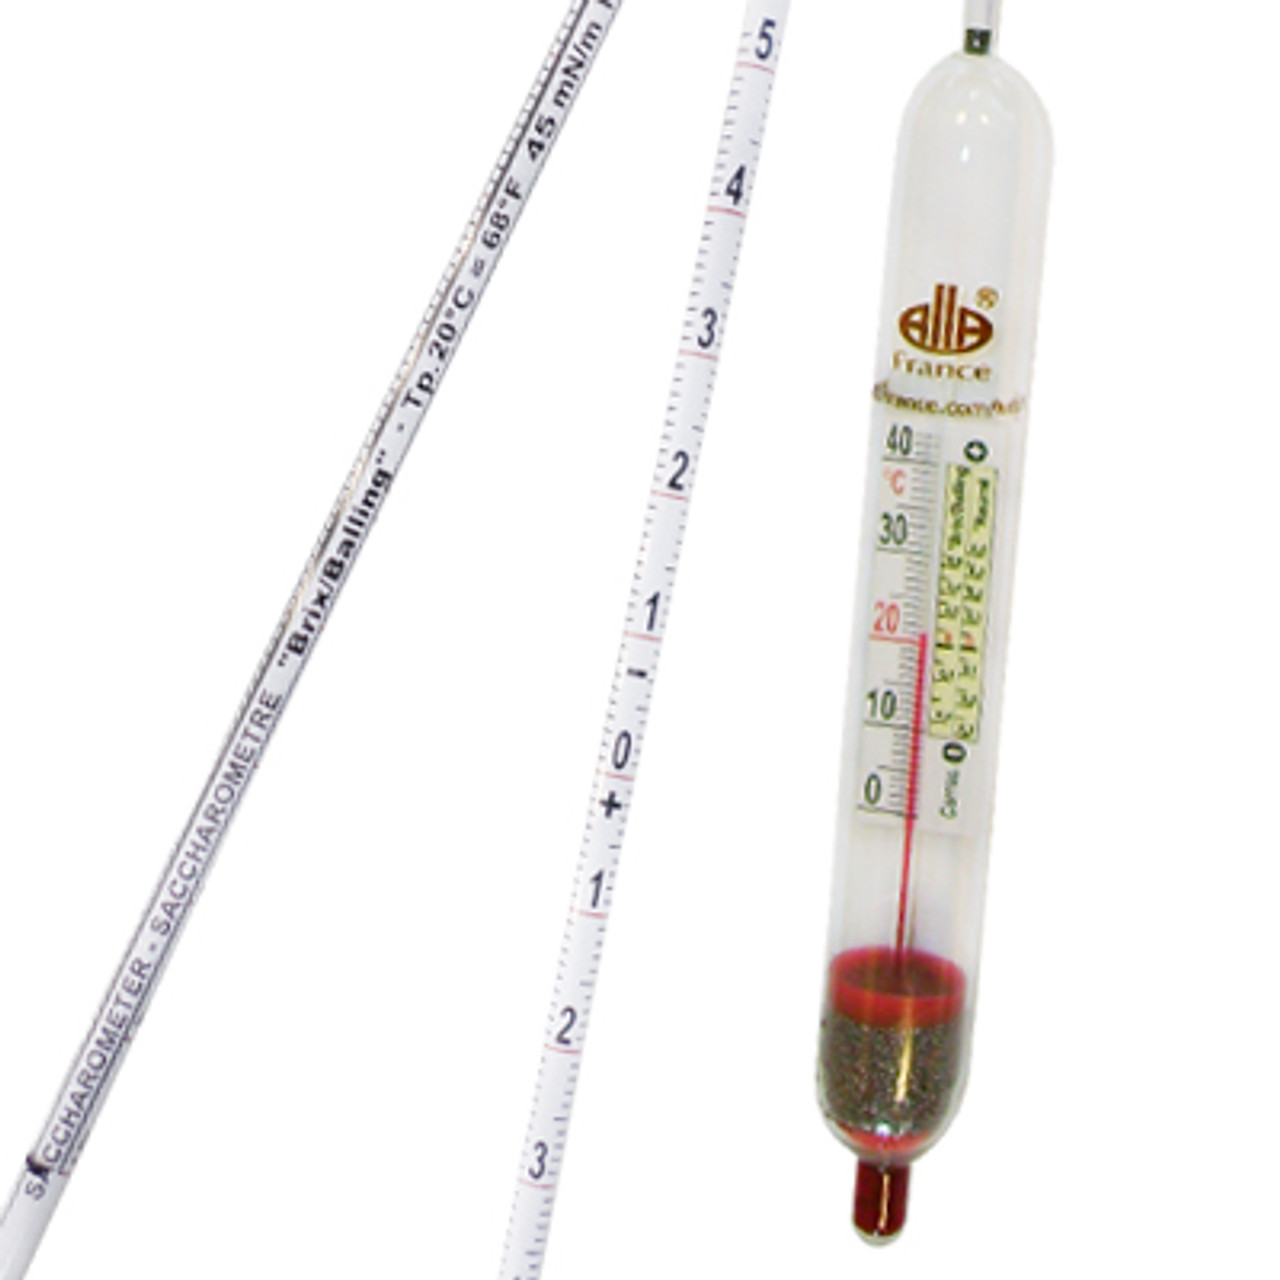 Big Daddy Dial Thermometer